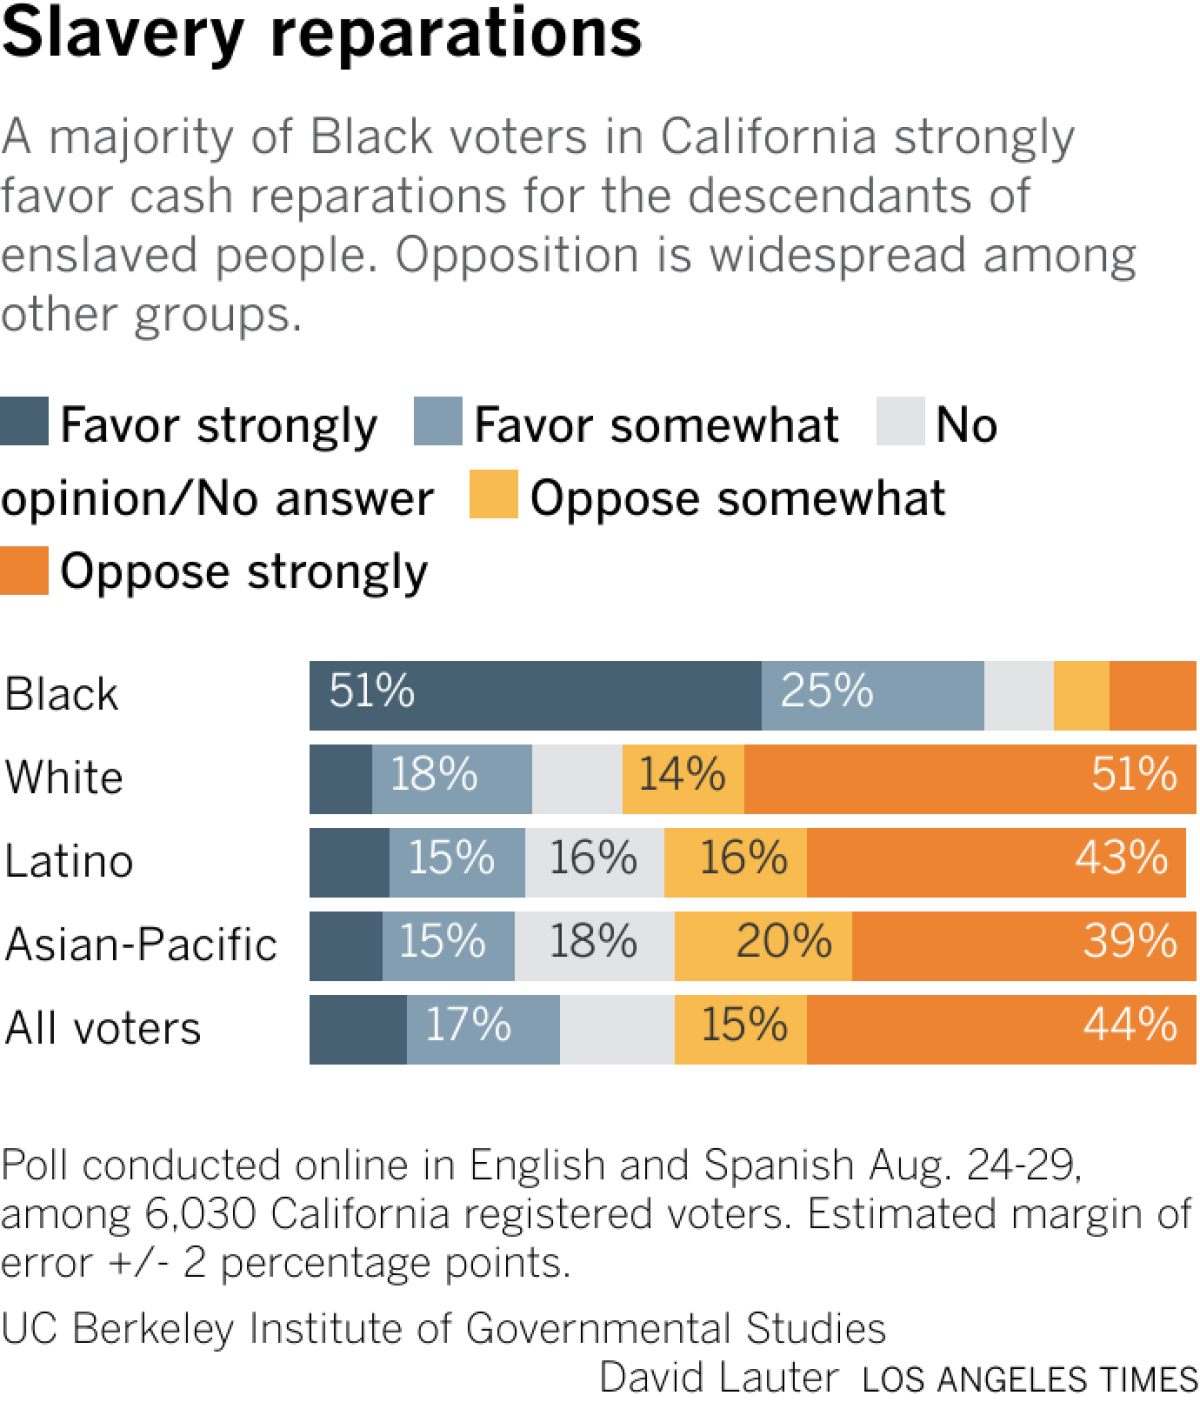 A majority of Black voters in California strongly favor cash reparations for the descendants of enslaved people. Opposition is widespread among other groups.